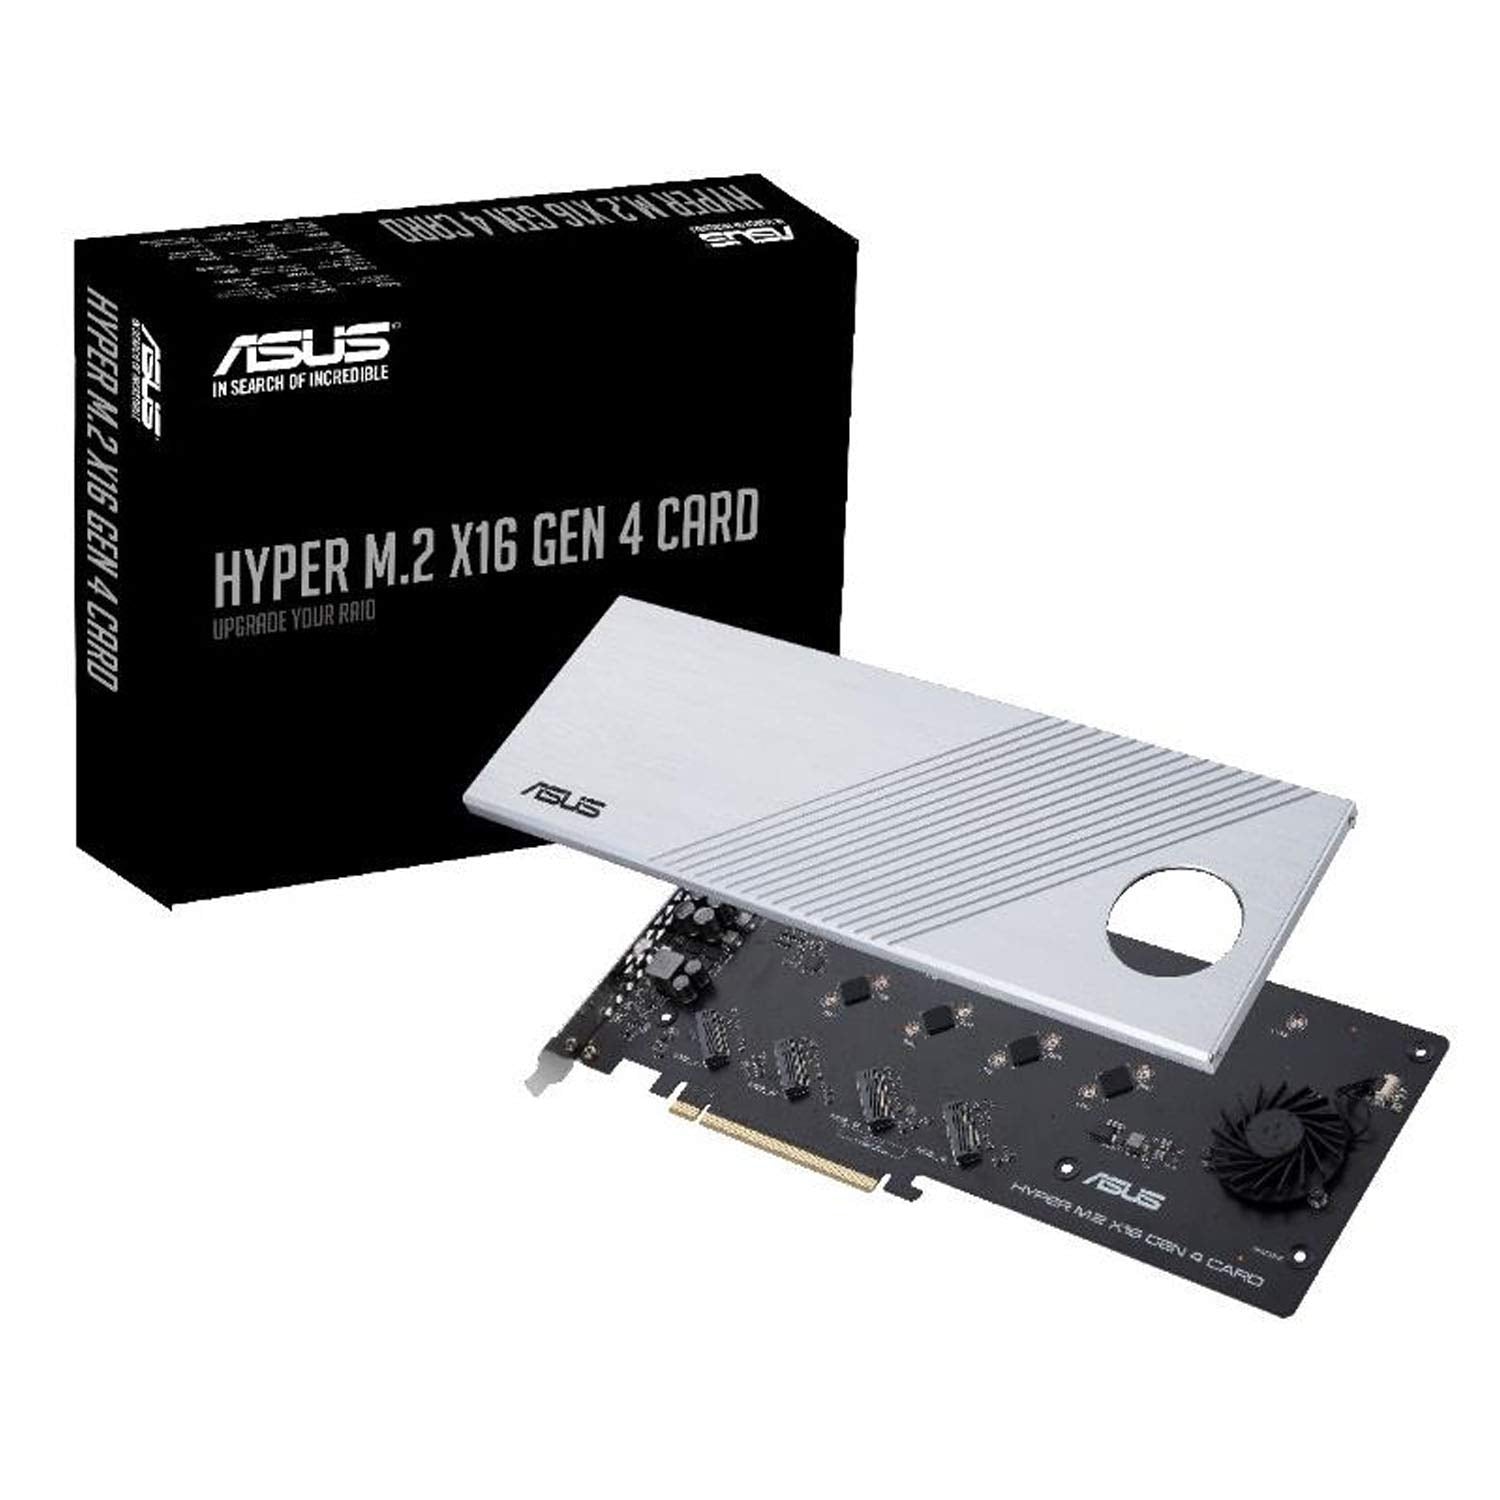 ASUS Hyper M.2 X16 PCIe 4.0 X4 Expansion Card Supports 4 NVMe M.2 (2242/2260/2280/22110) up to 256Gbps for AMD 3rd Ryzen sTRX40, AM4 Socket and Intel VROC NVMe Raid